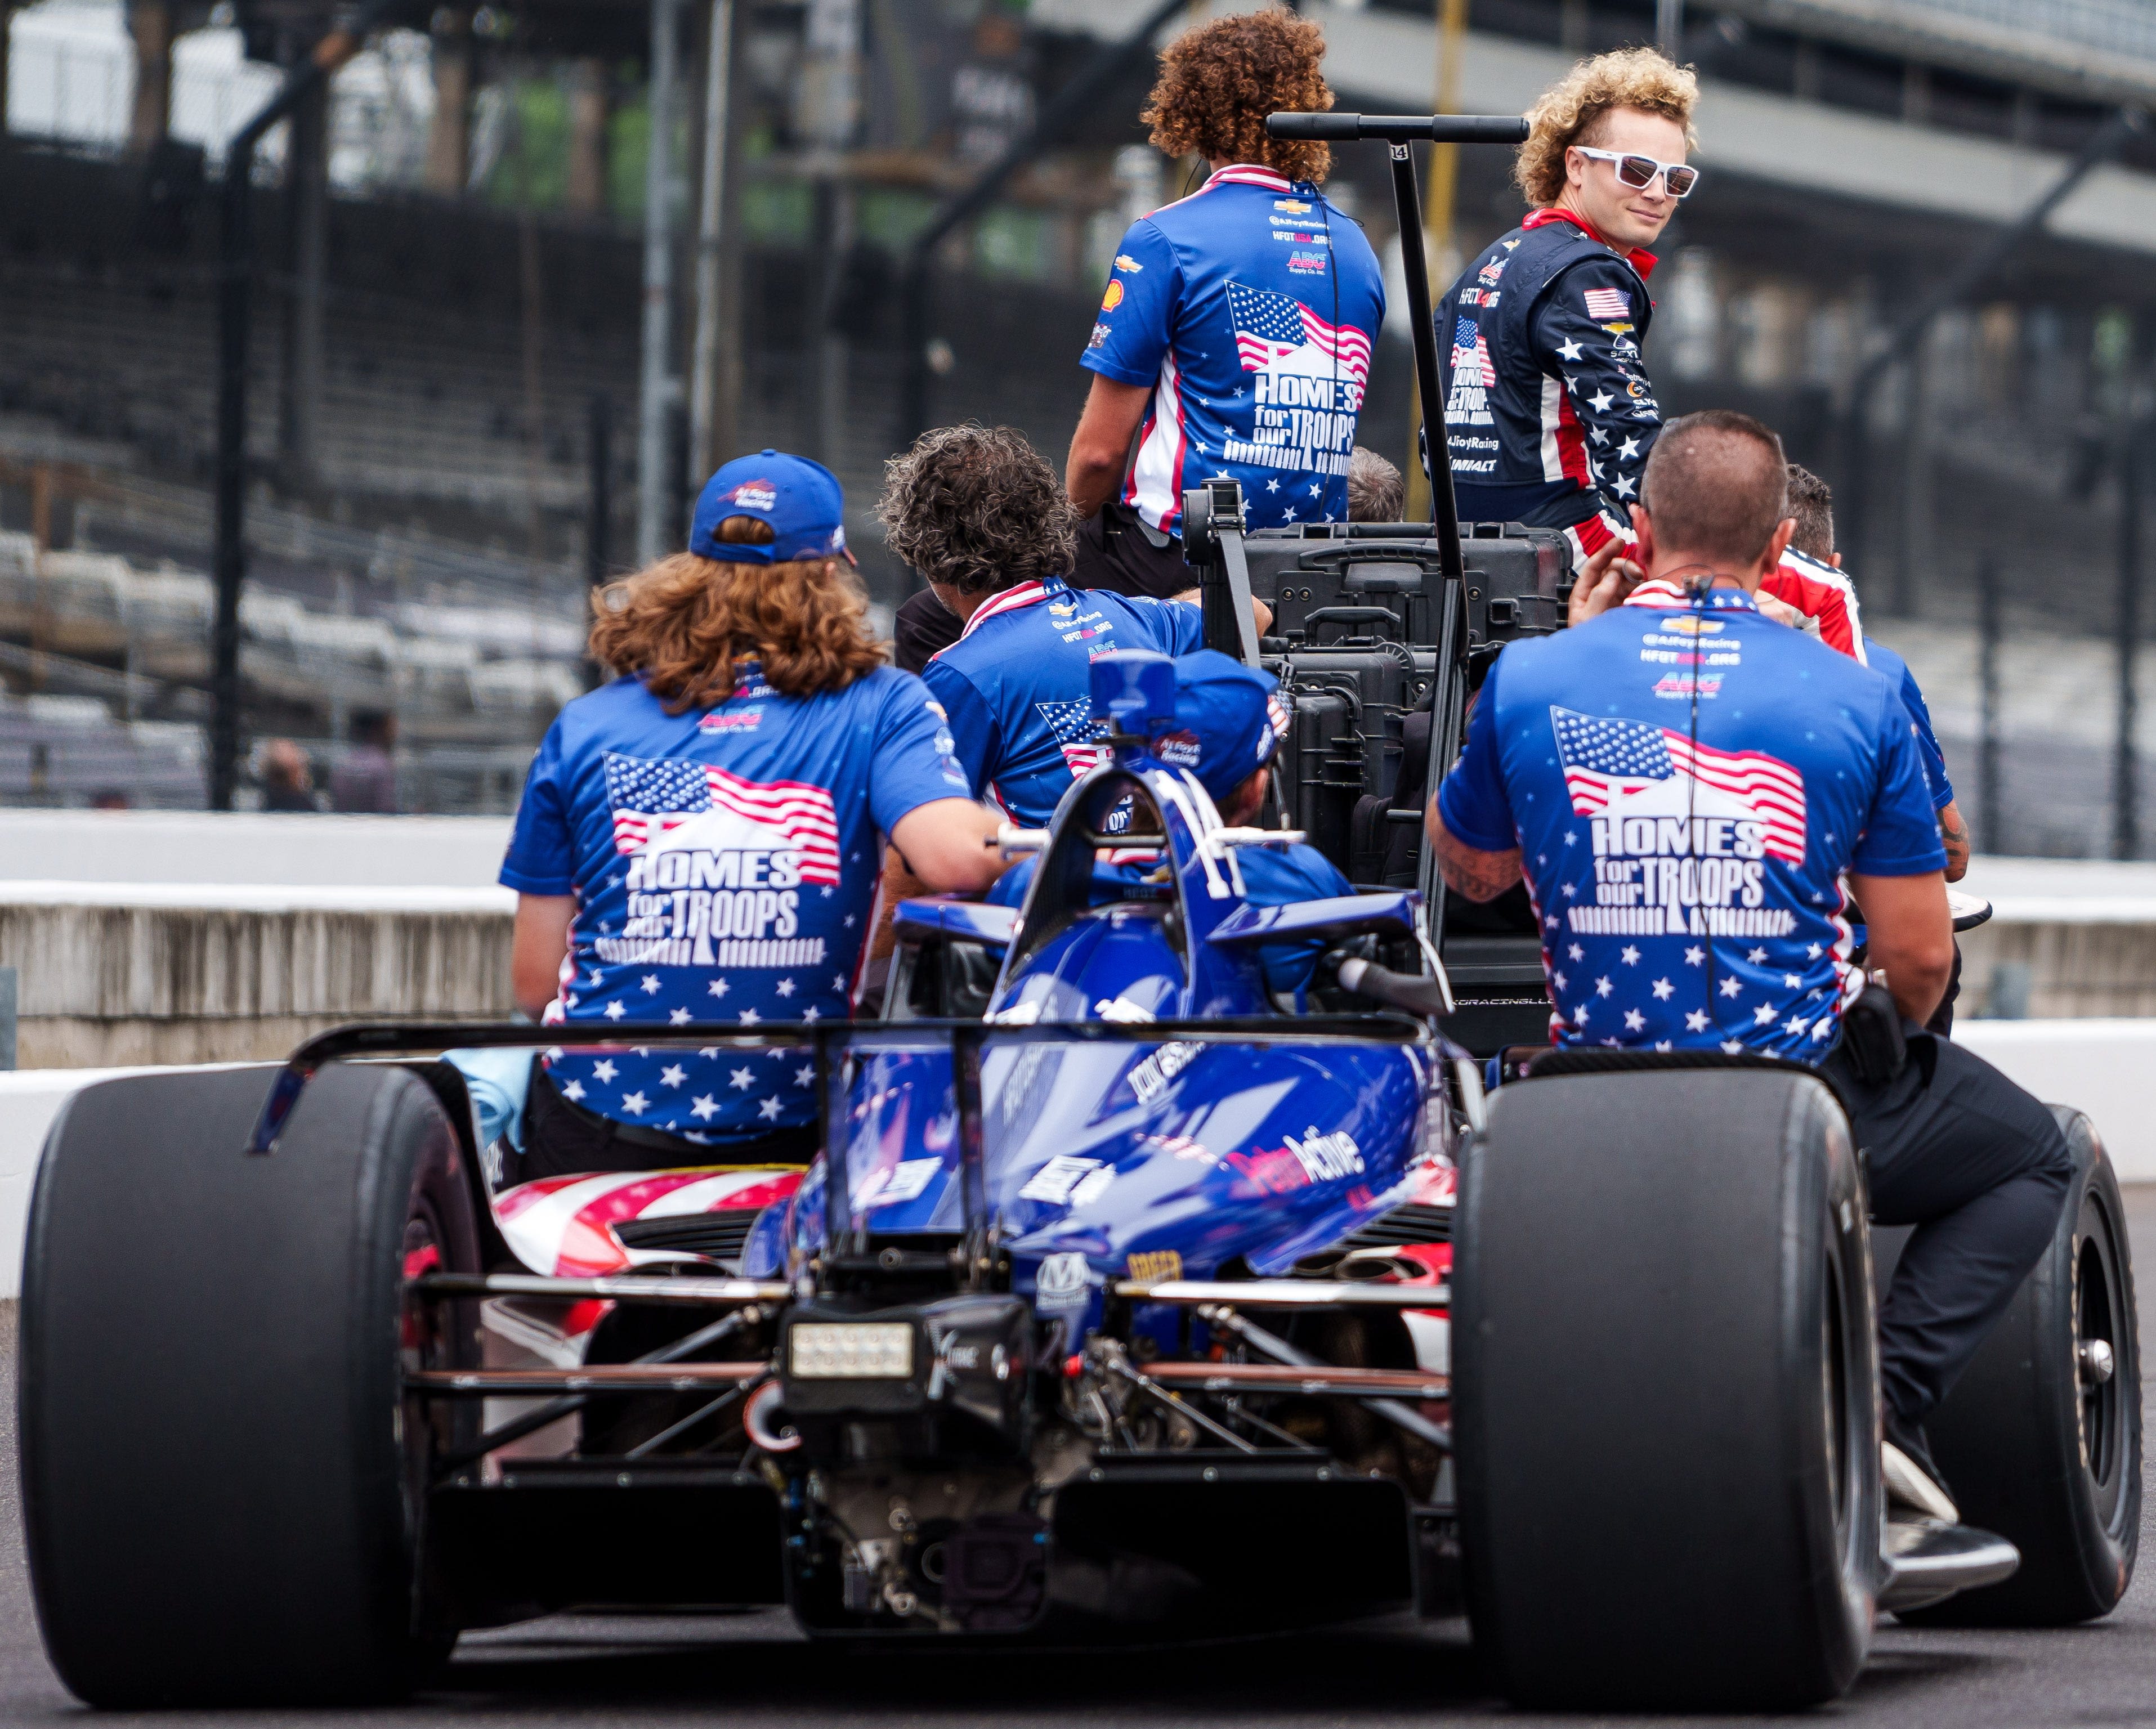 Who is Santino Ferrucci? Get to know A.J. Foyt Racing driver set for Indy 500 race at IMS